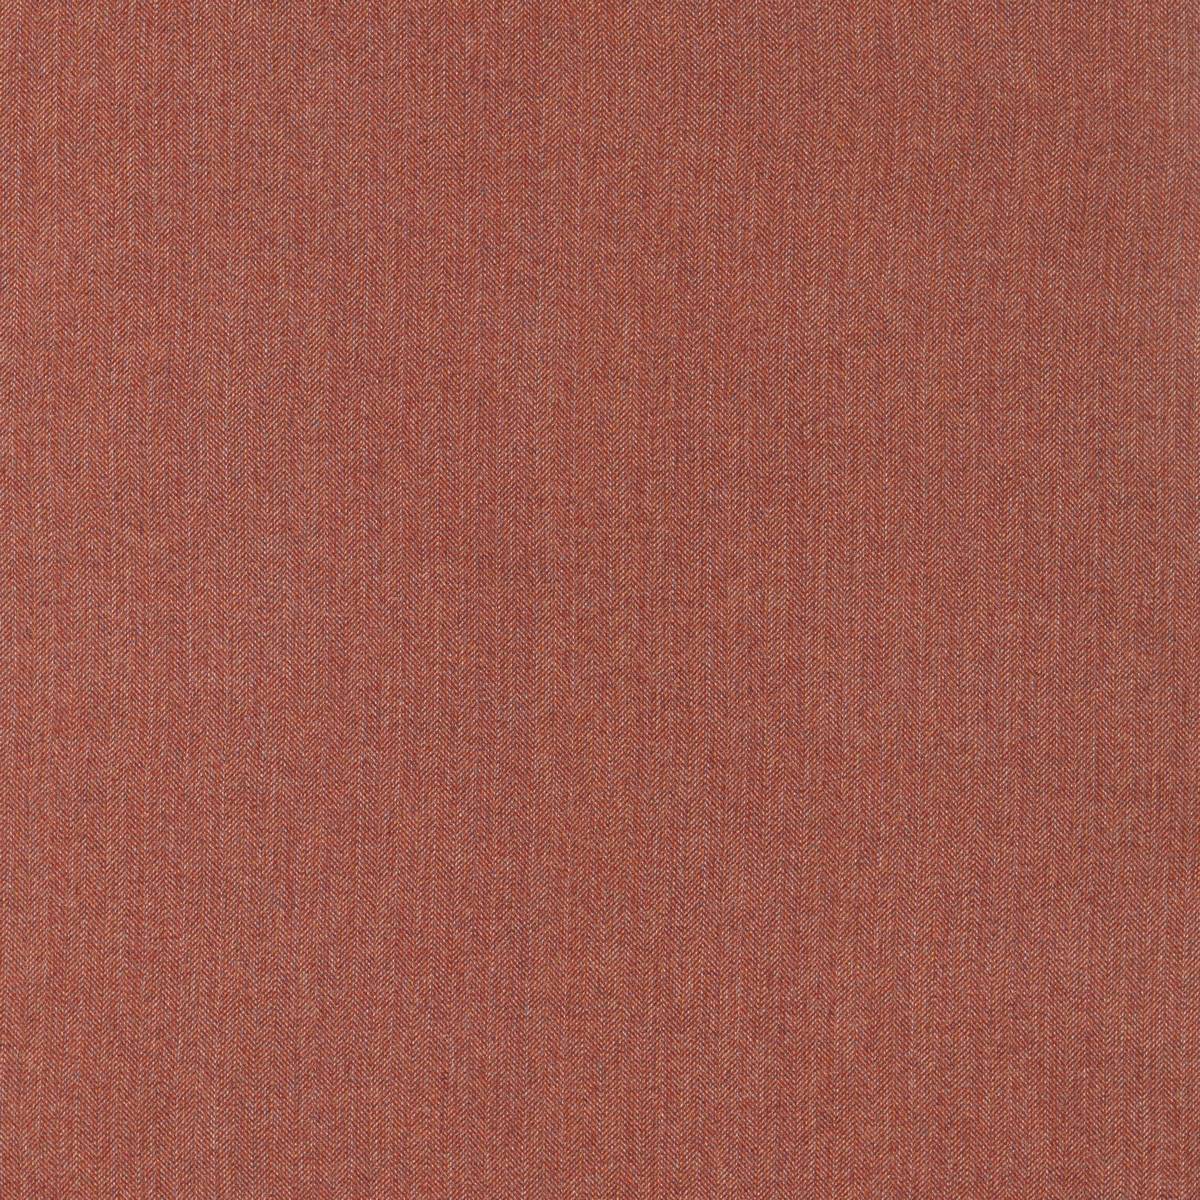 Hector Russet Fabric by Sanderson